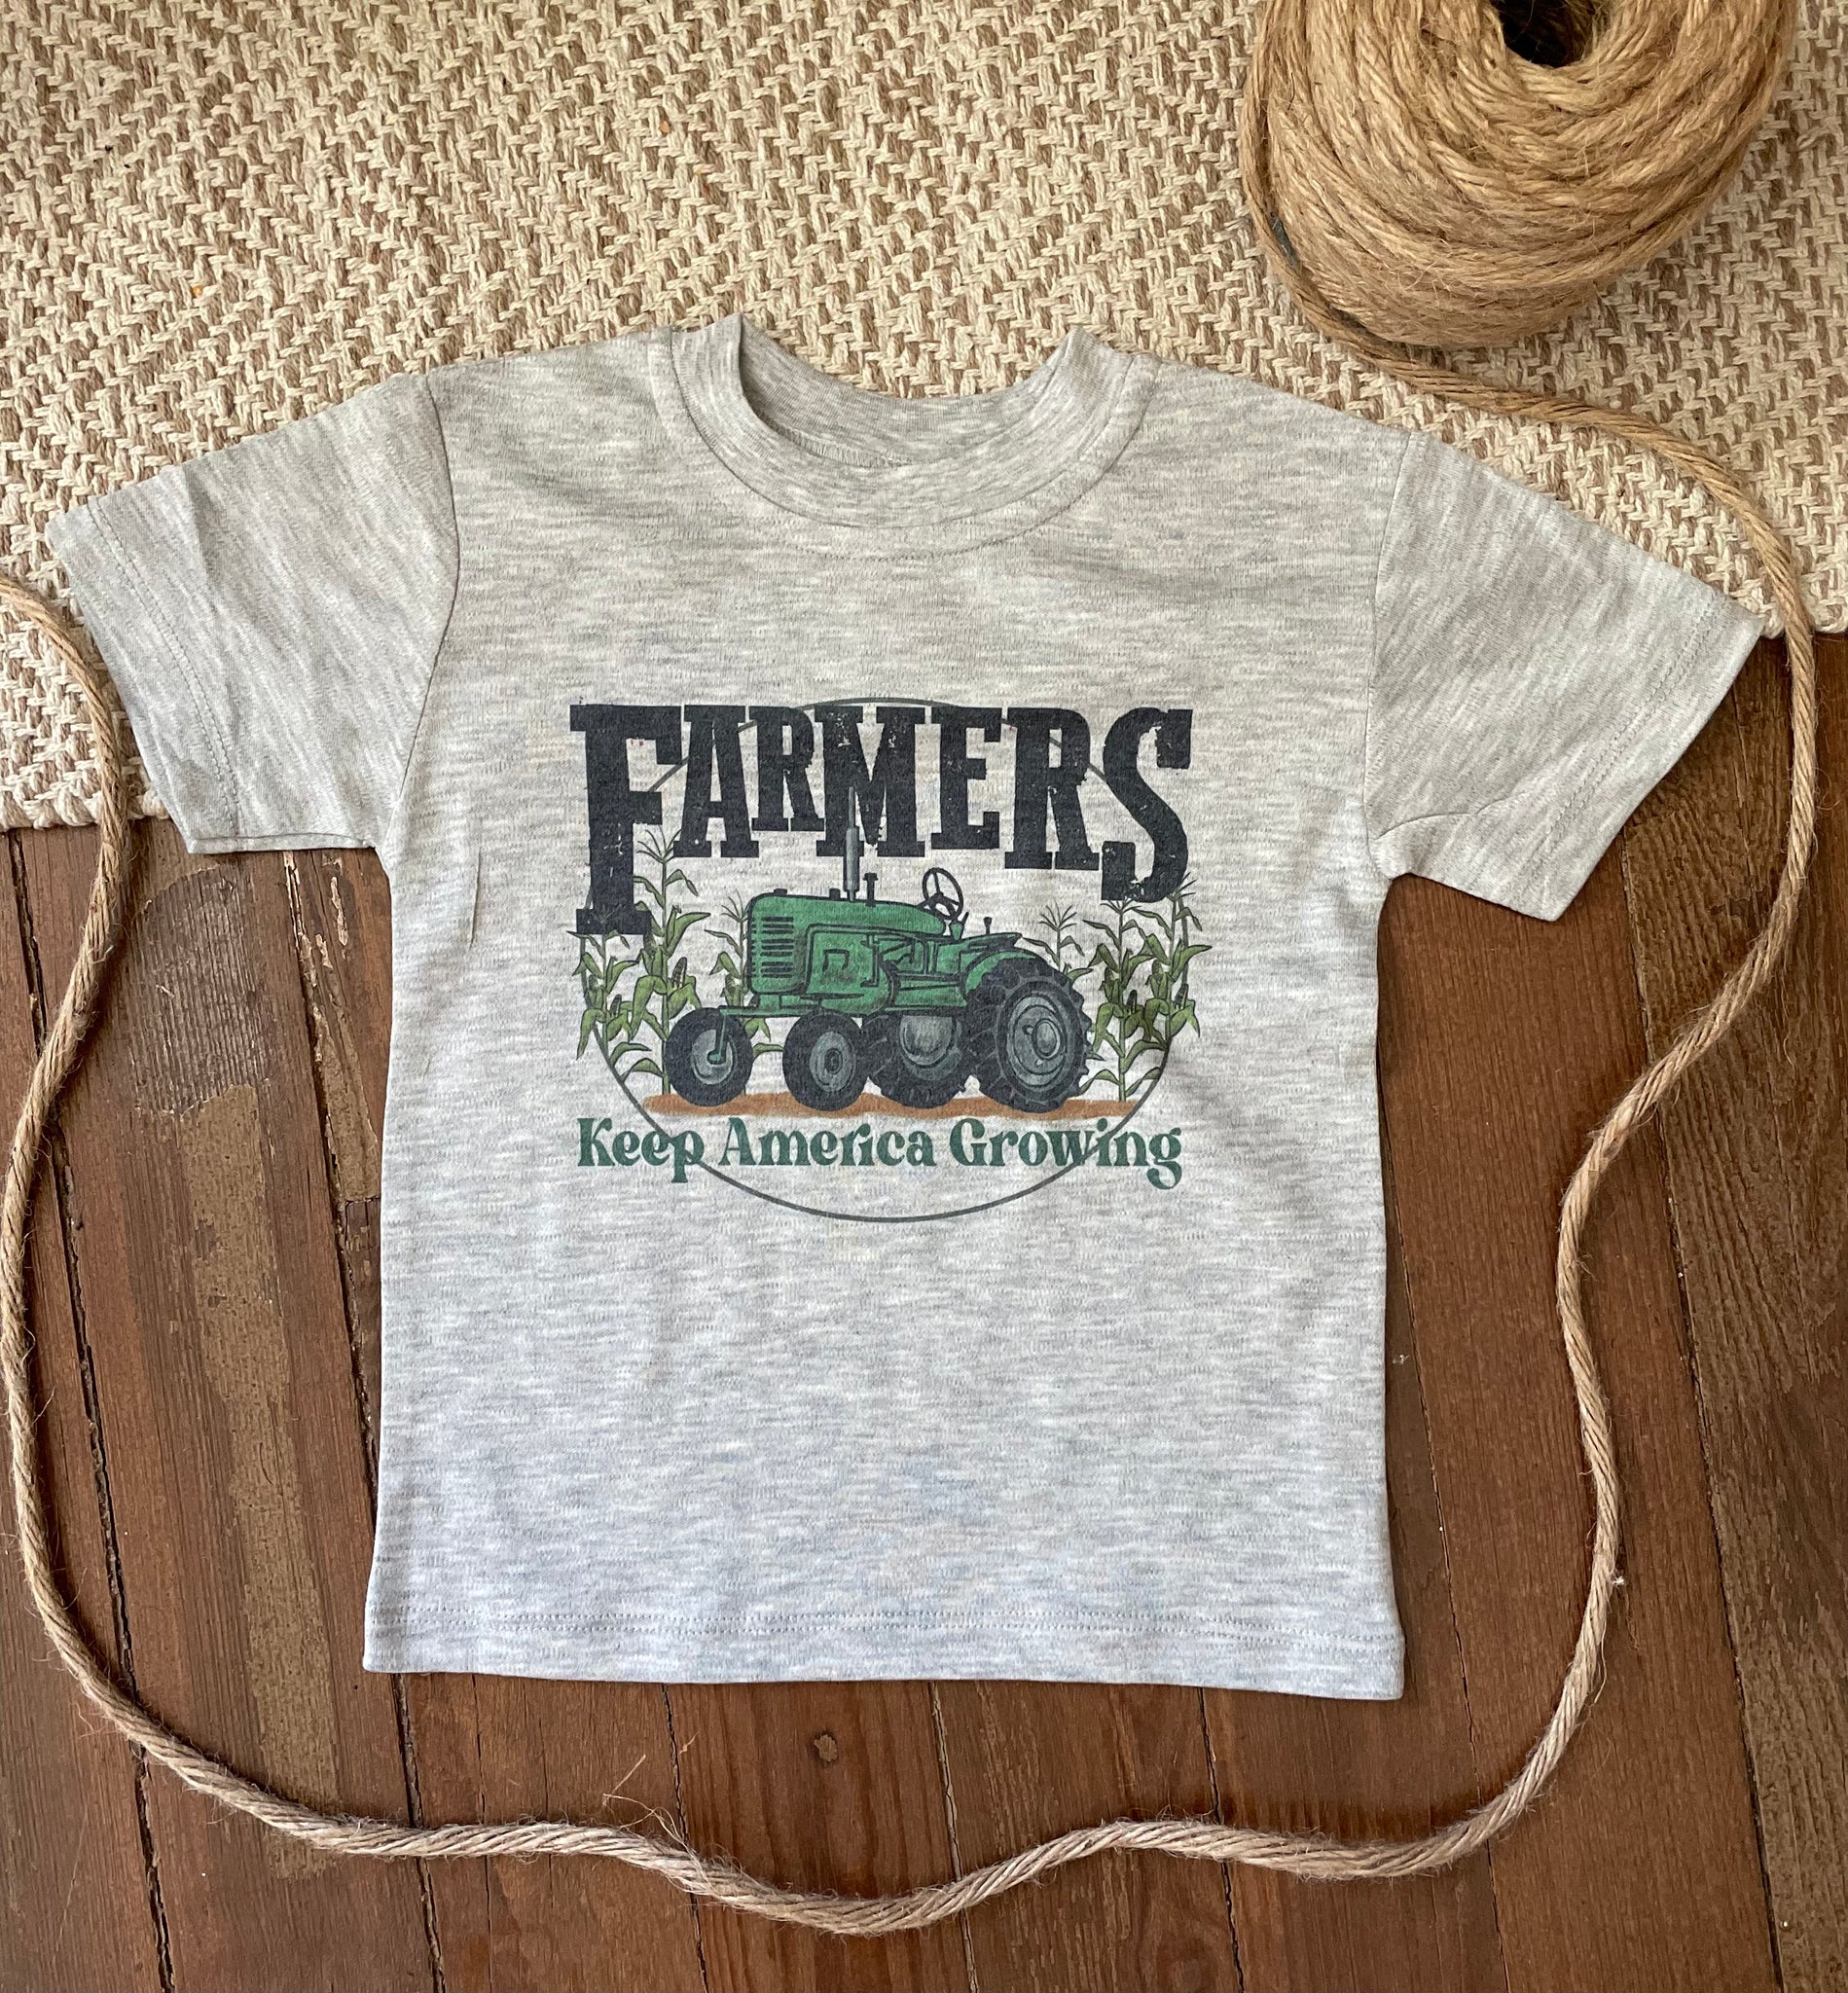 The Green Toddler Harvester Tee